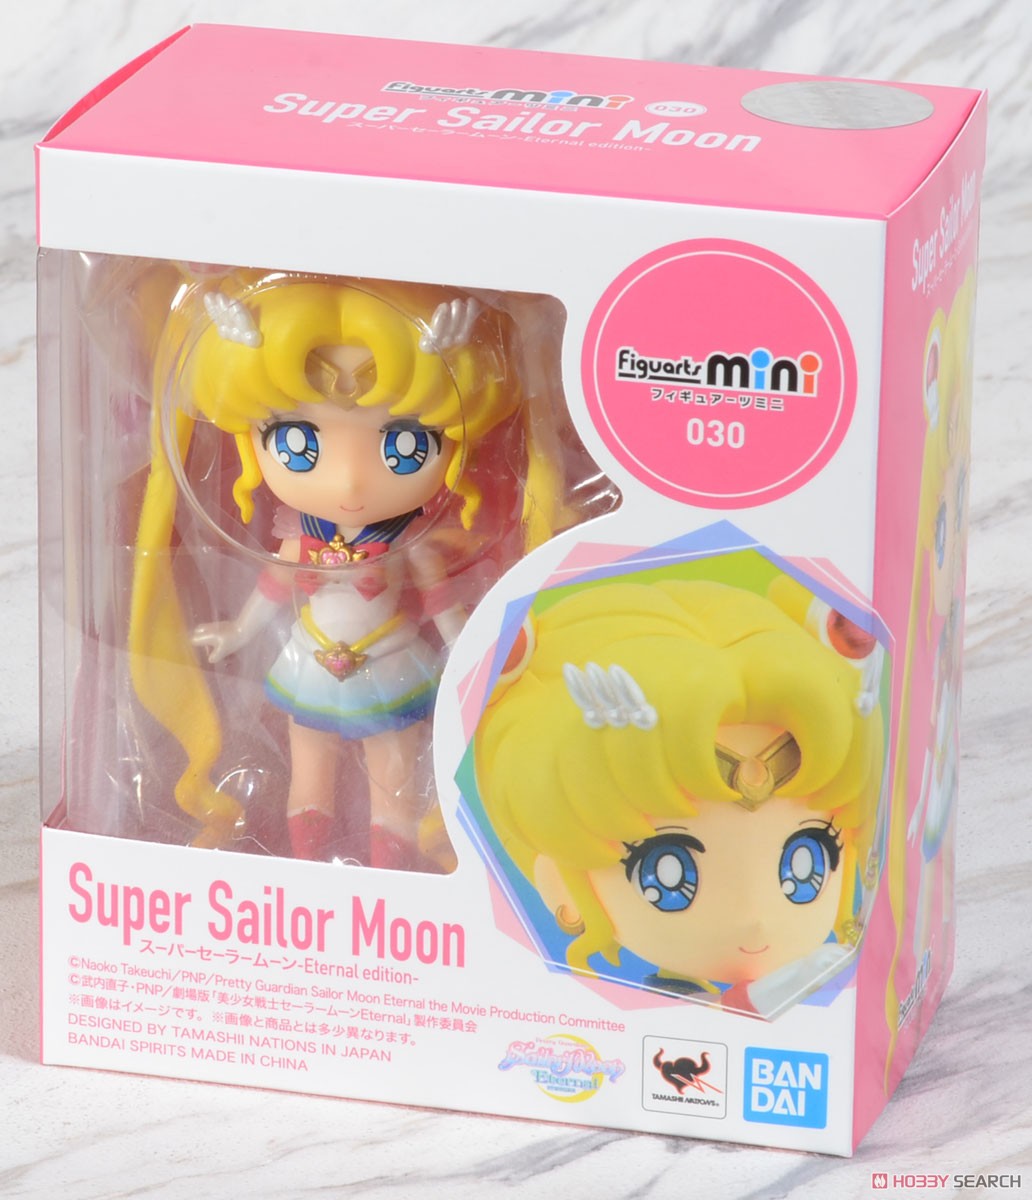 Figuarts Mini Super Sailor Moon -Eternal Edition- (Completed) Package1